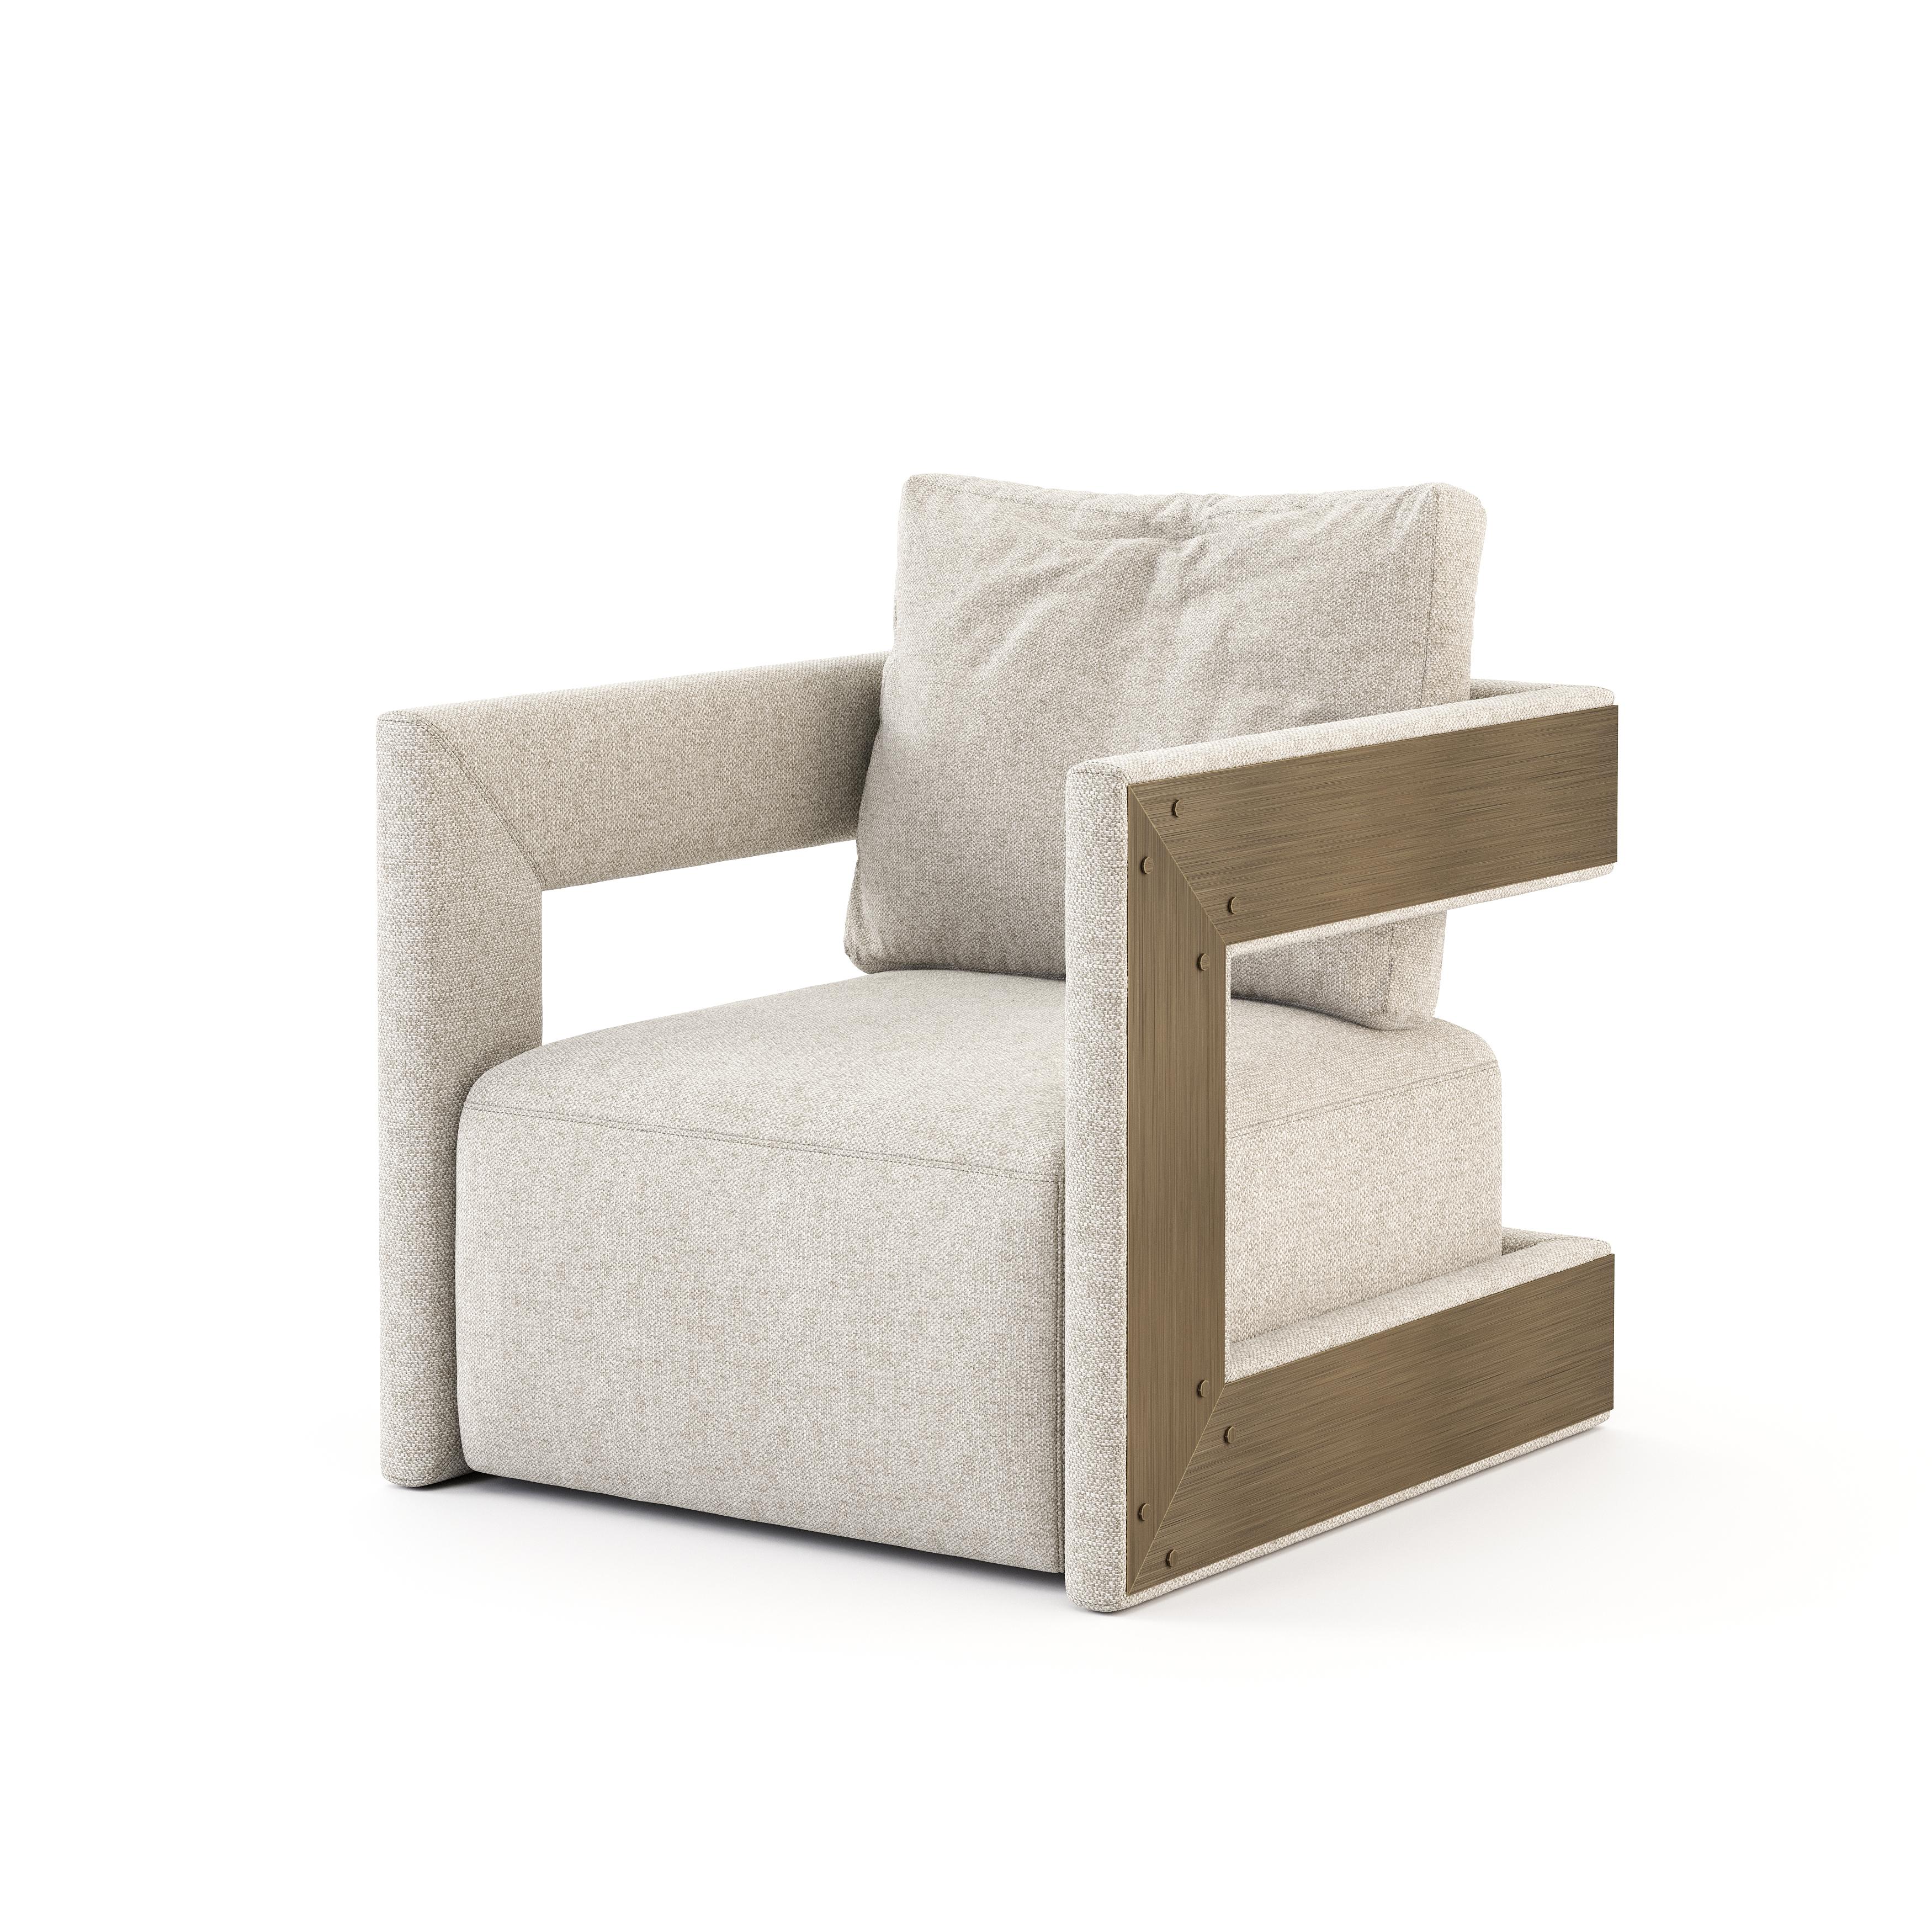 With a contemporary design of straight lines, this armchair gives status and personality to the space. The matte wood detail on the sides provides a touch of design and elegance to the piece. Ideal for living room, office or bedroom.
Seat, backrest